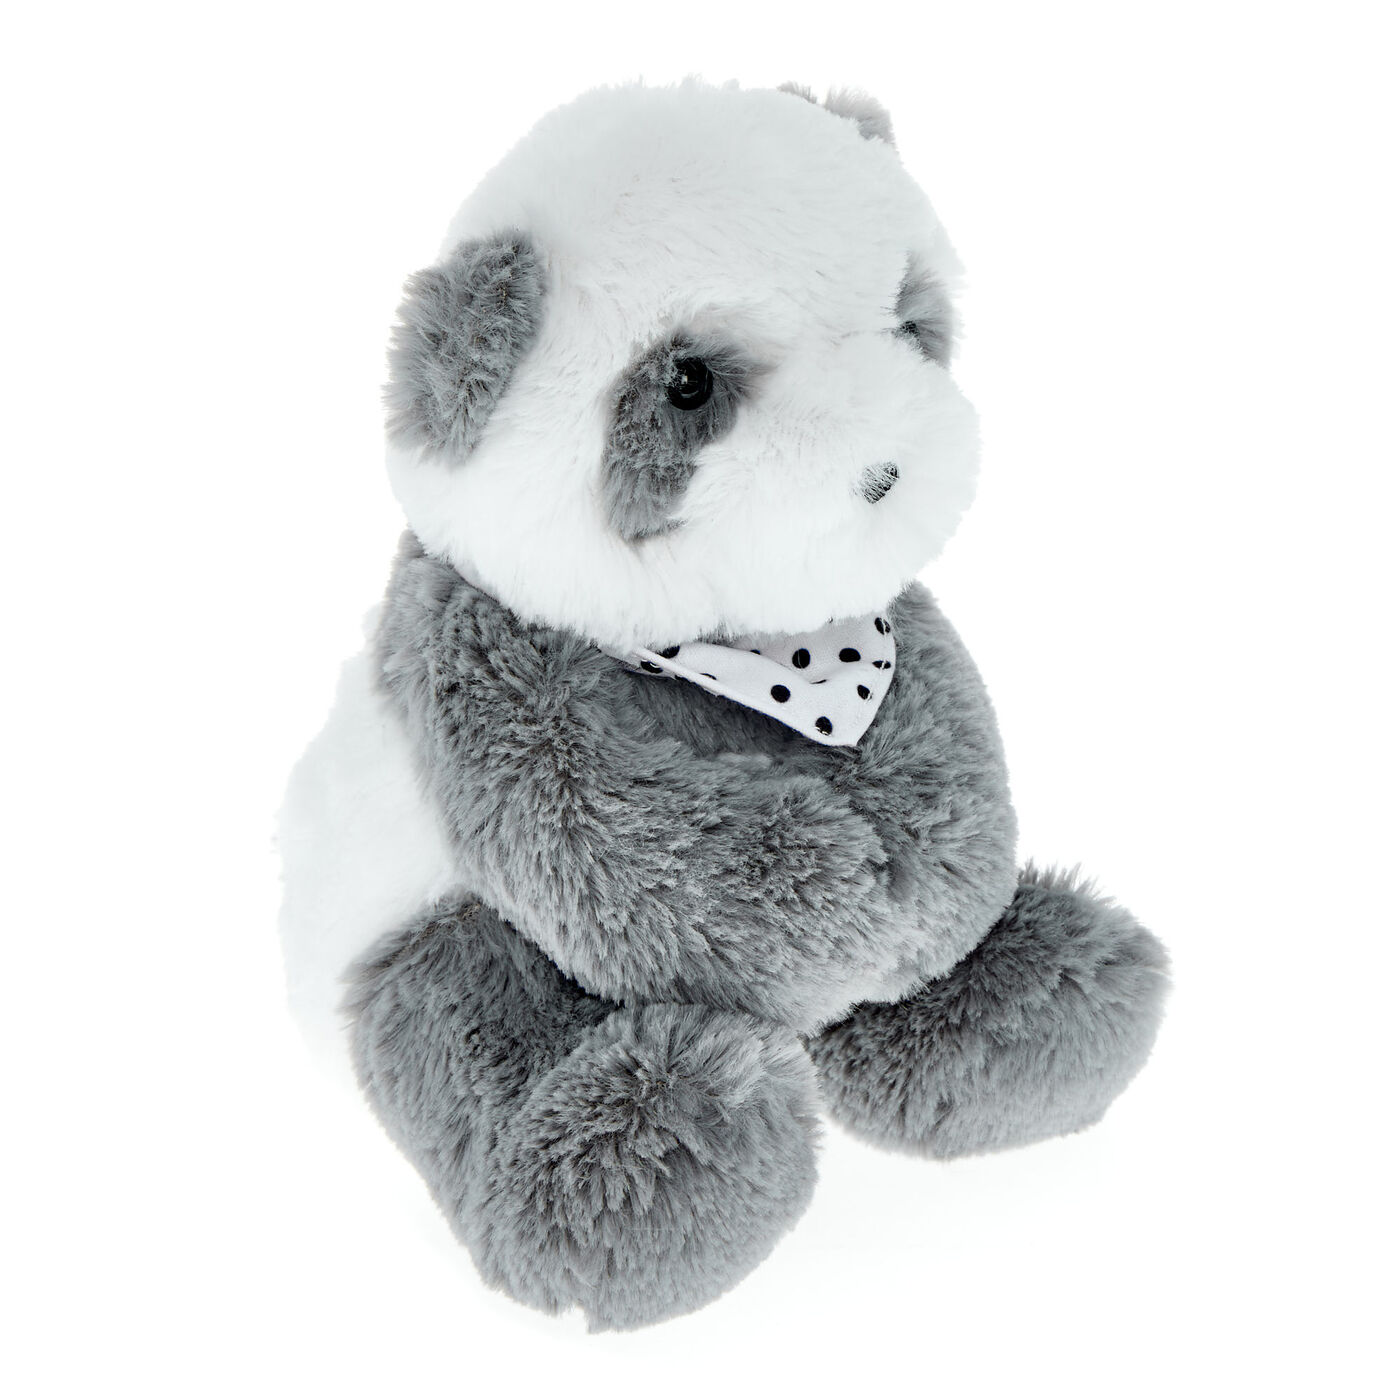 Buy Small Panda Soft Toy for GBP 3.99 | Card Factory UK